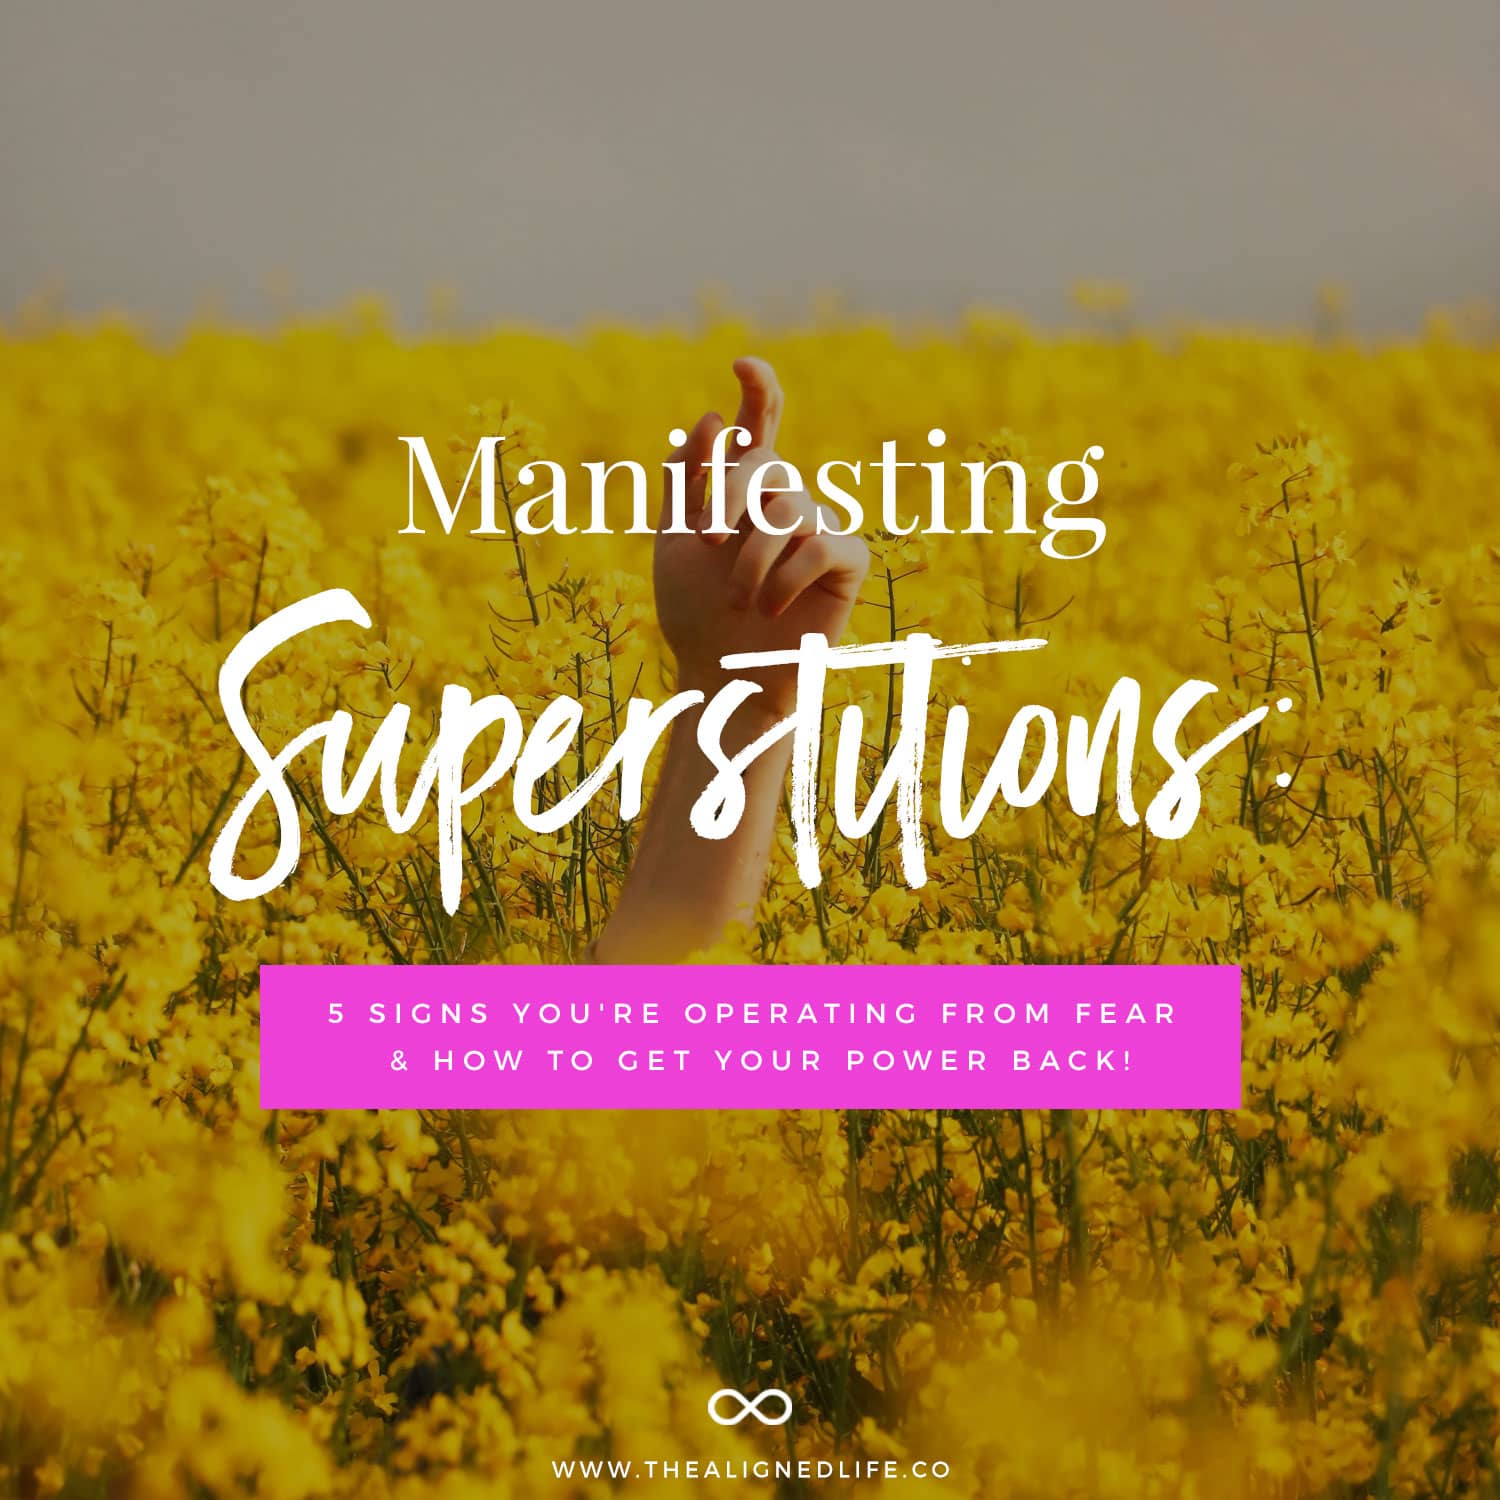 Manifestation Superstitions: 5 Signs You're Operating From Fear & How To Get Your Power Back!